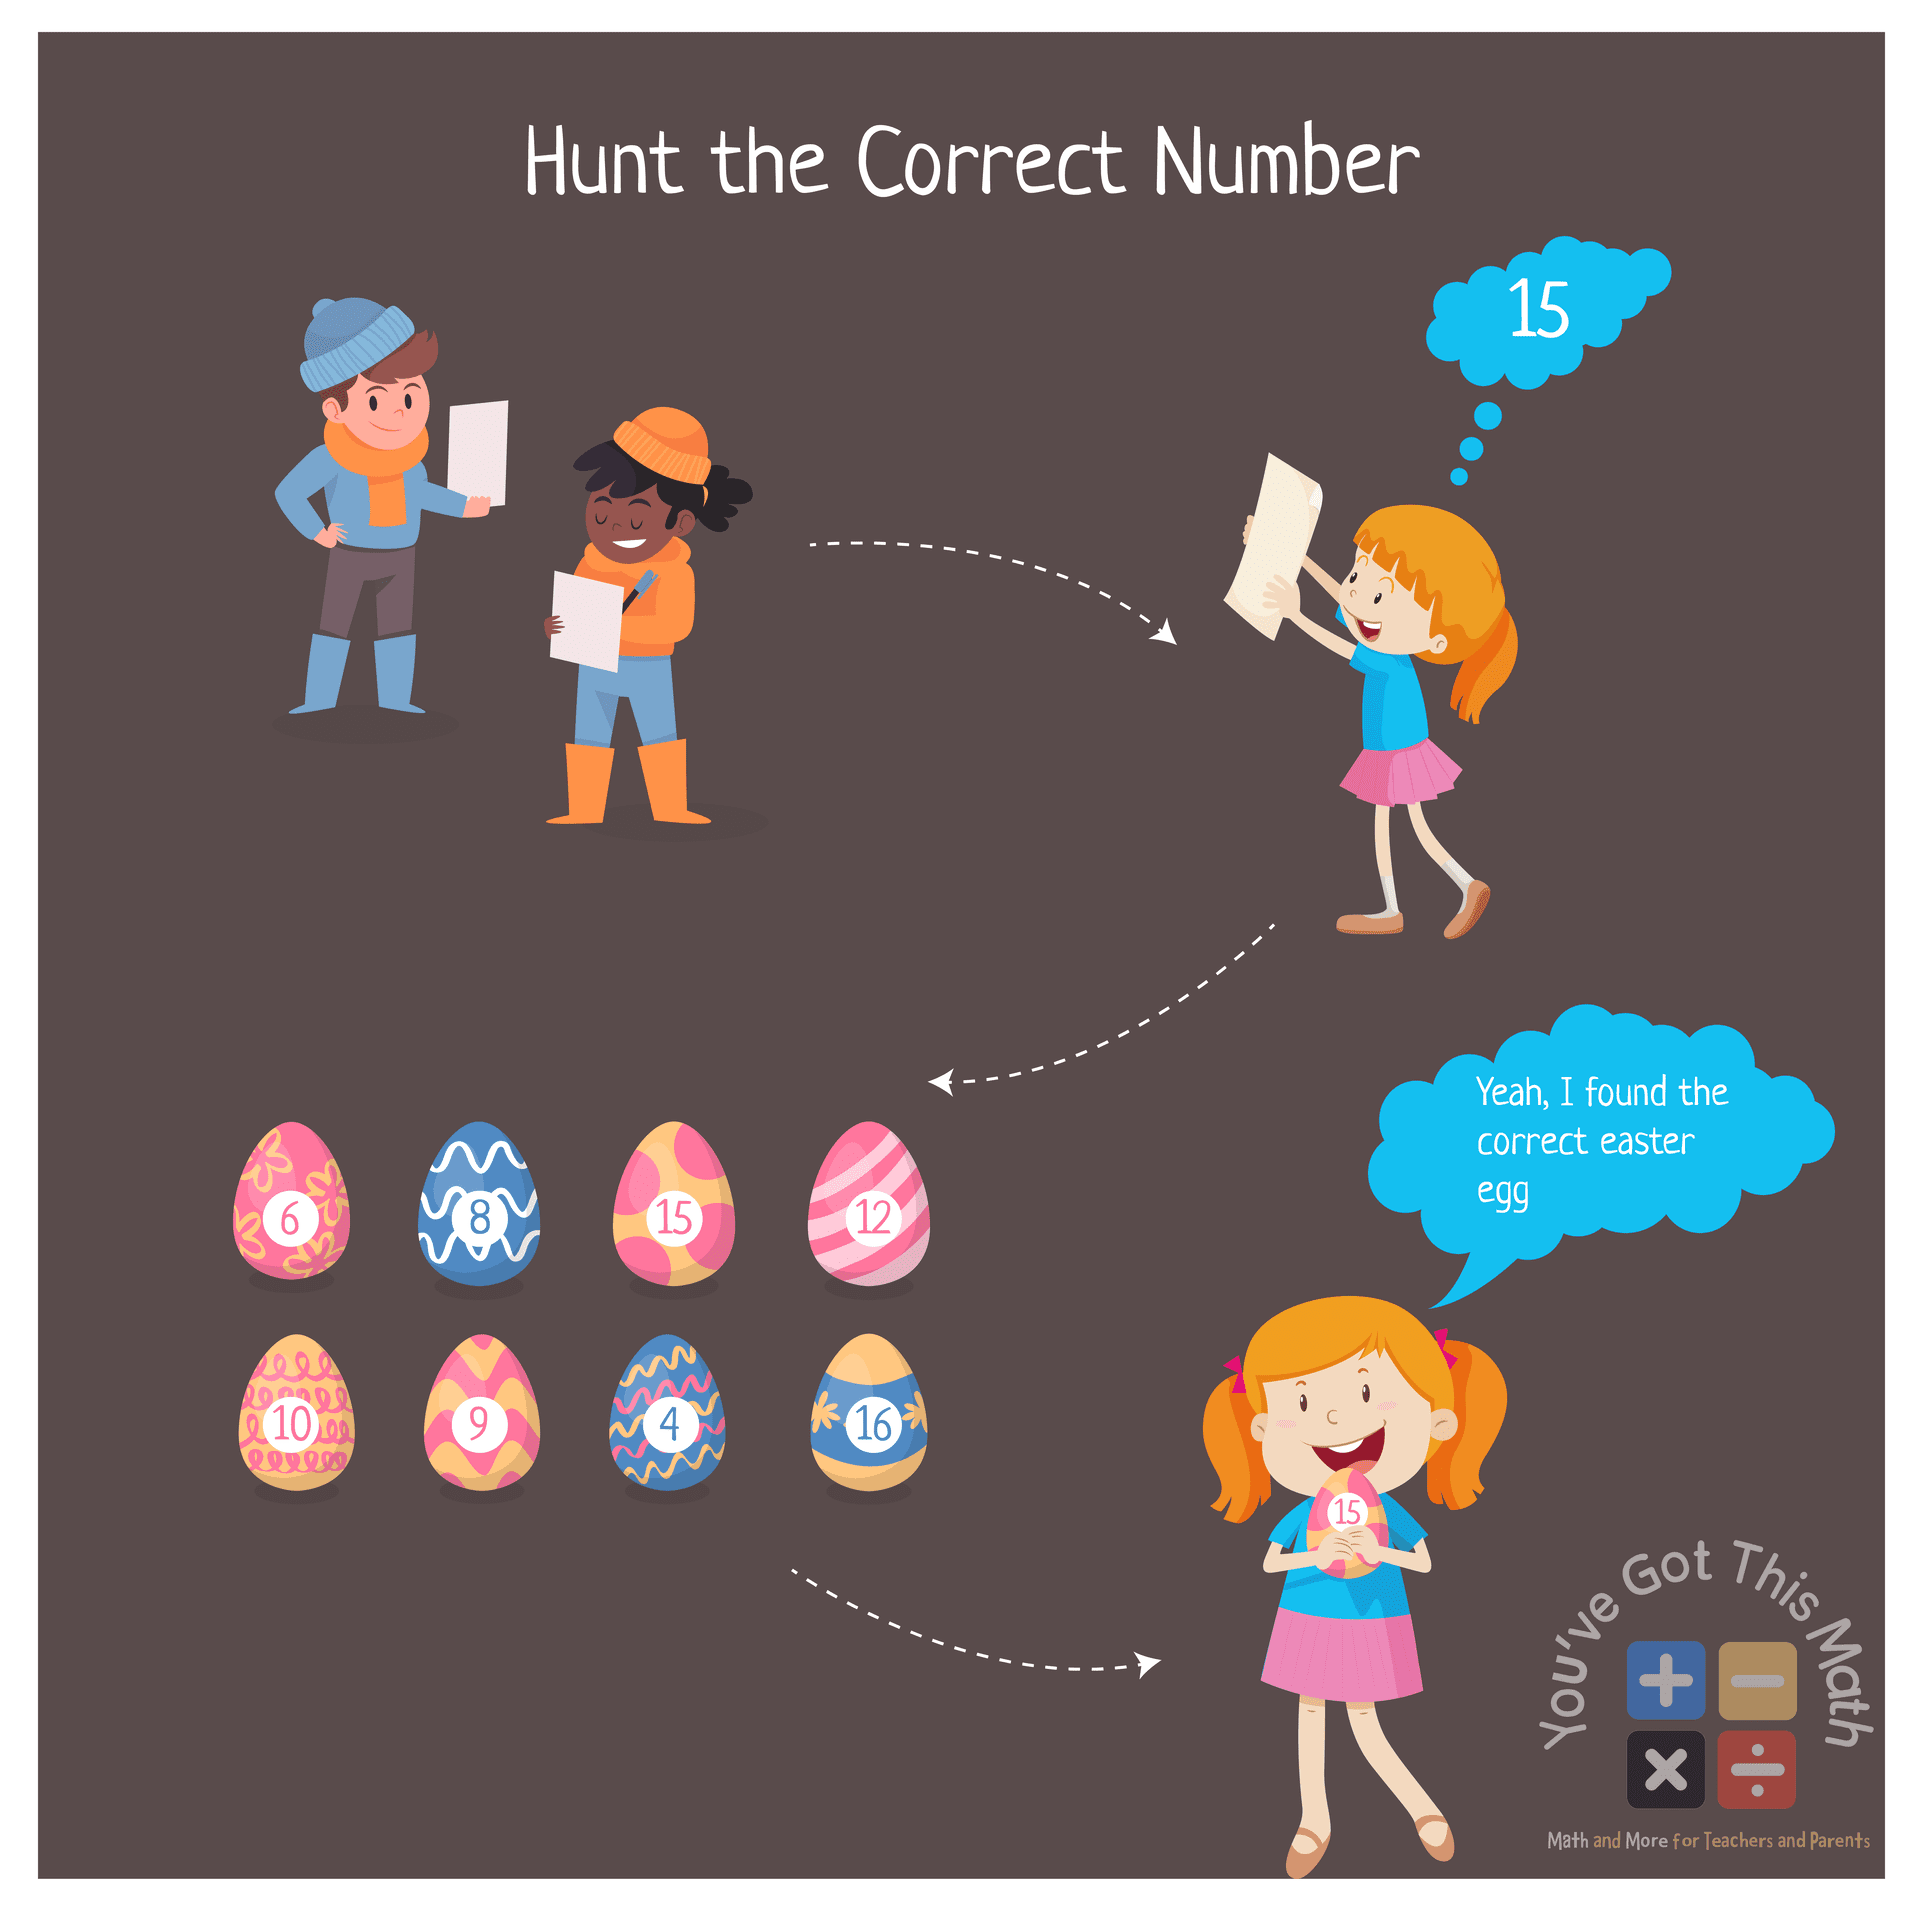 Hunt the correct number